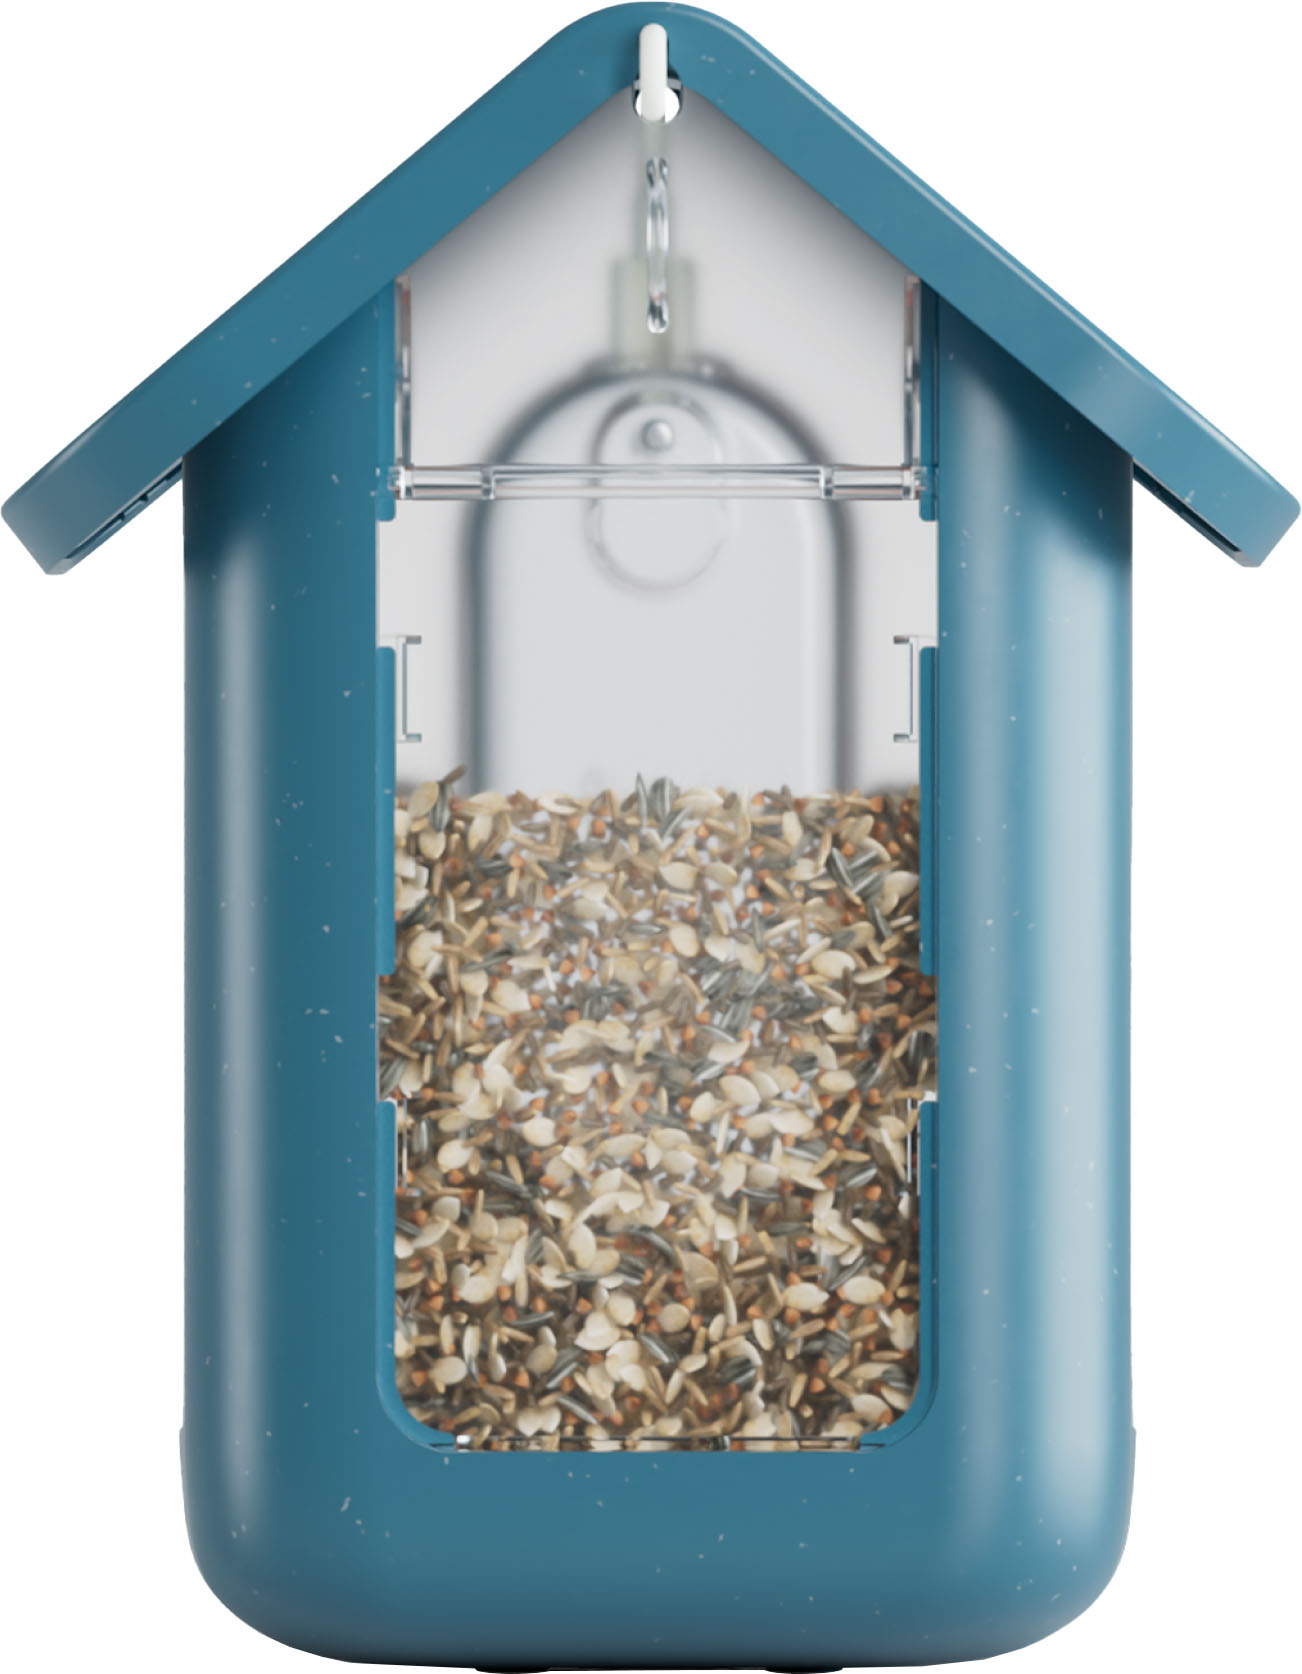 Review: Bird Buddy smart bird feeder lets you enjoy your feathered friends